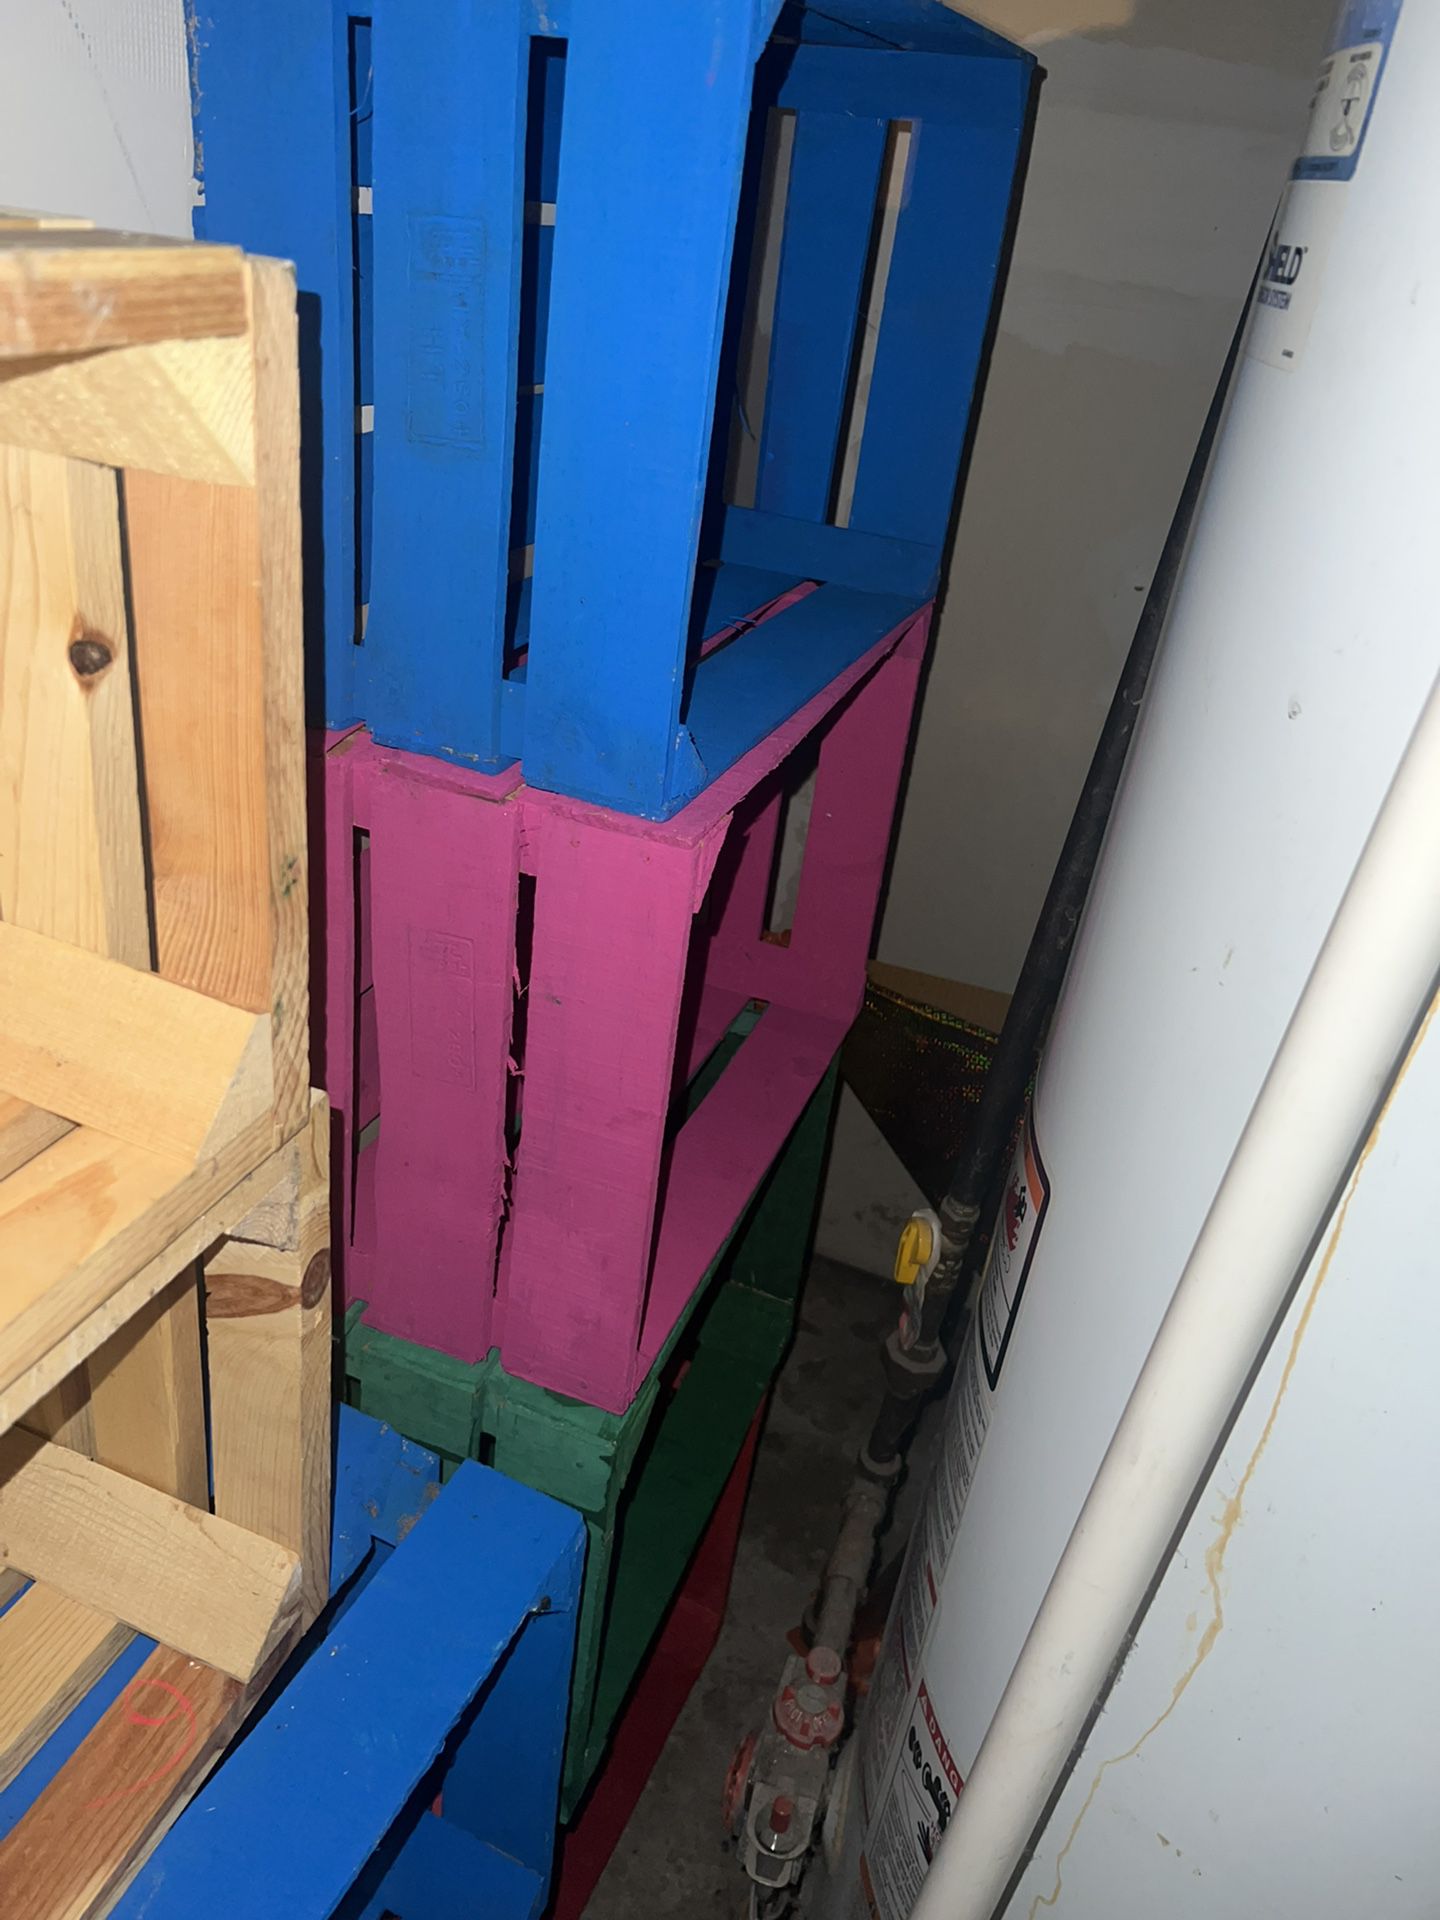 6 Colorful Crate Boxes 